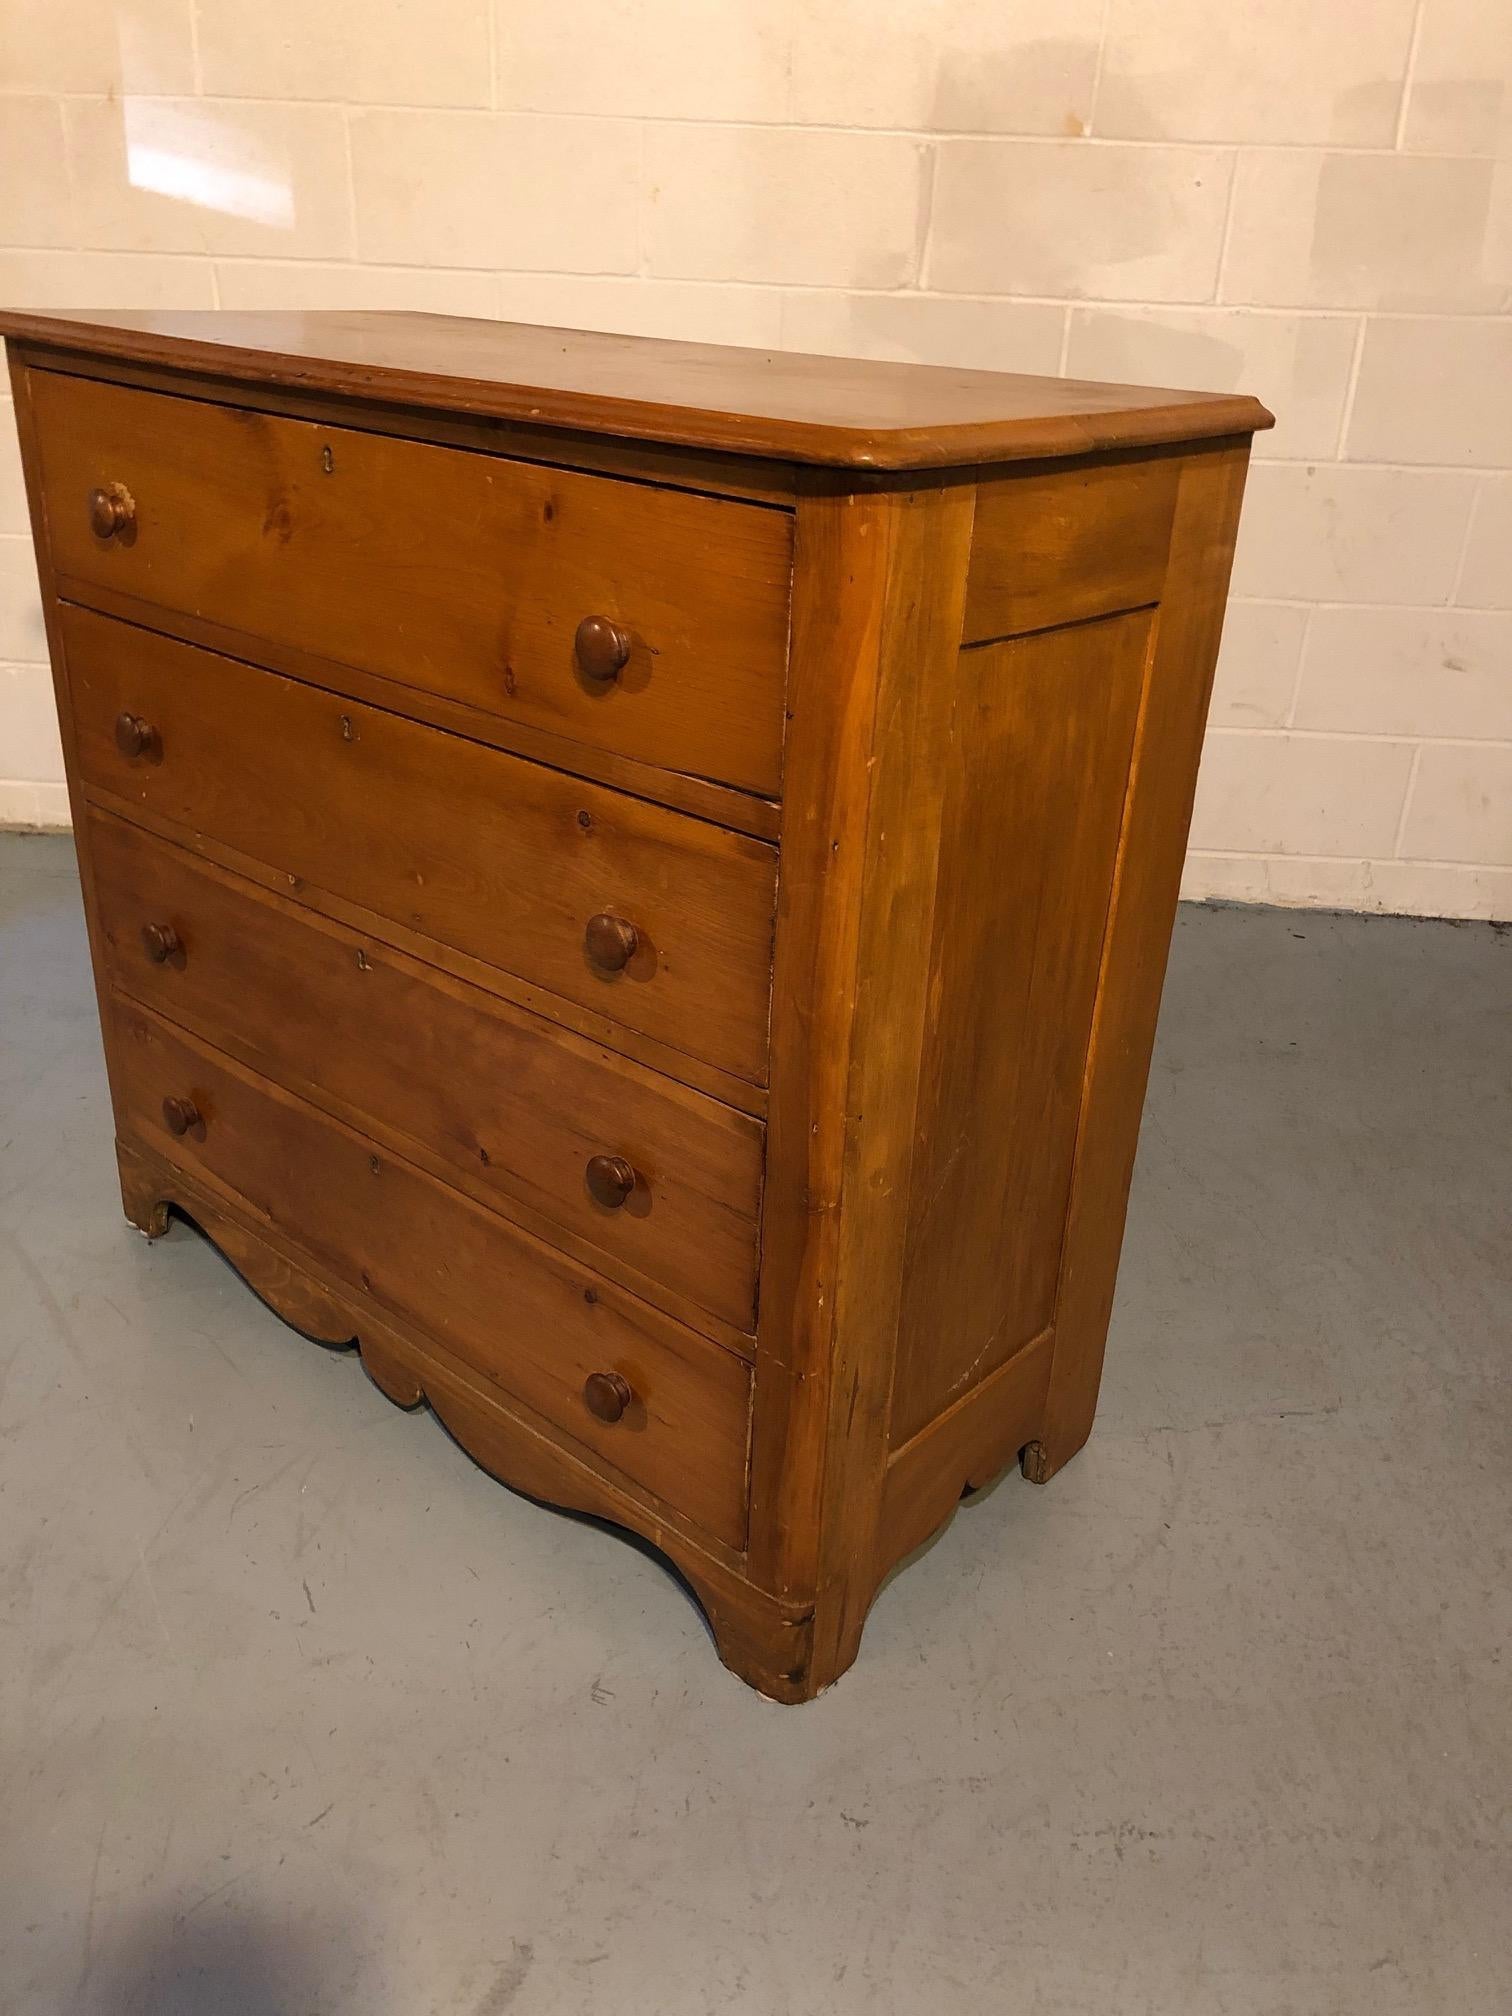 Pre-Civil War natural pine dresser having a classic simple design including 4 drawers with round wooden pulls. Each drawer measures 32 long x 13 deep x 6.5 in height